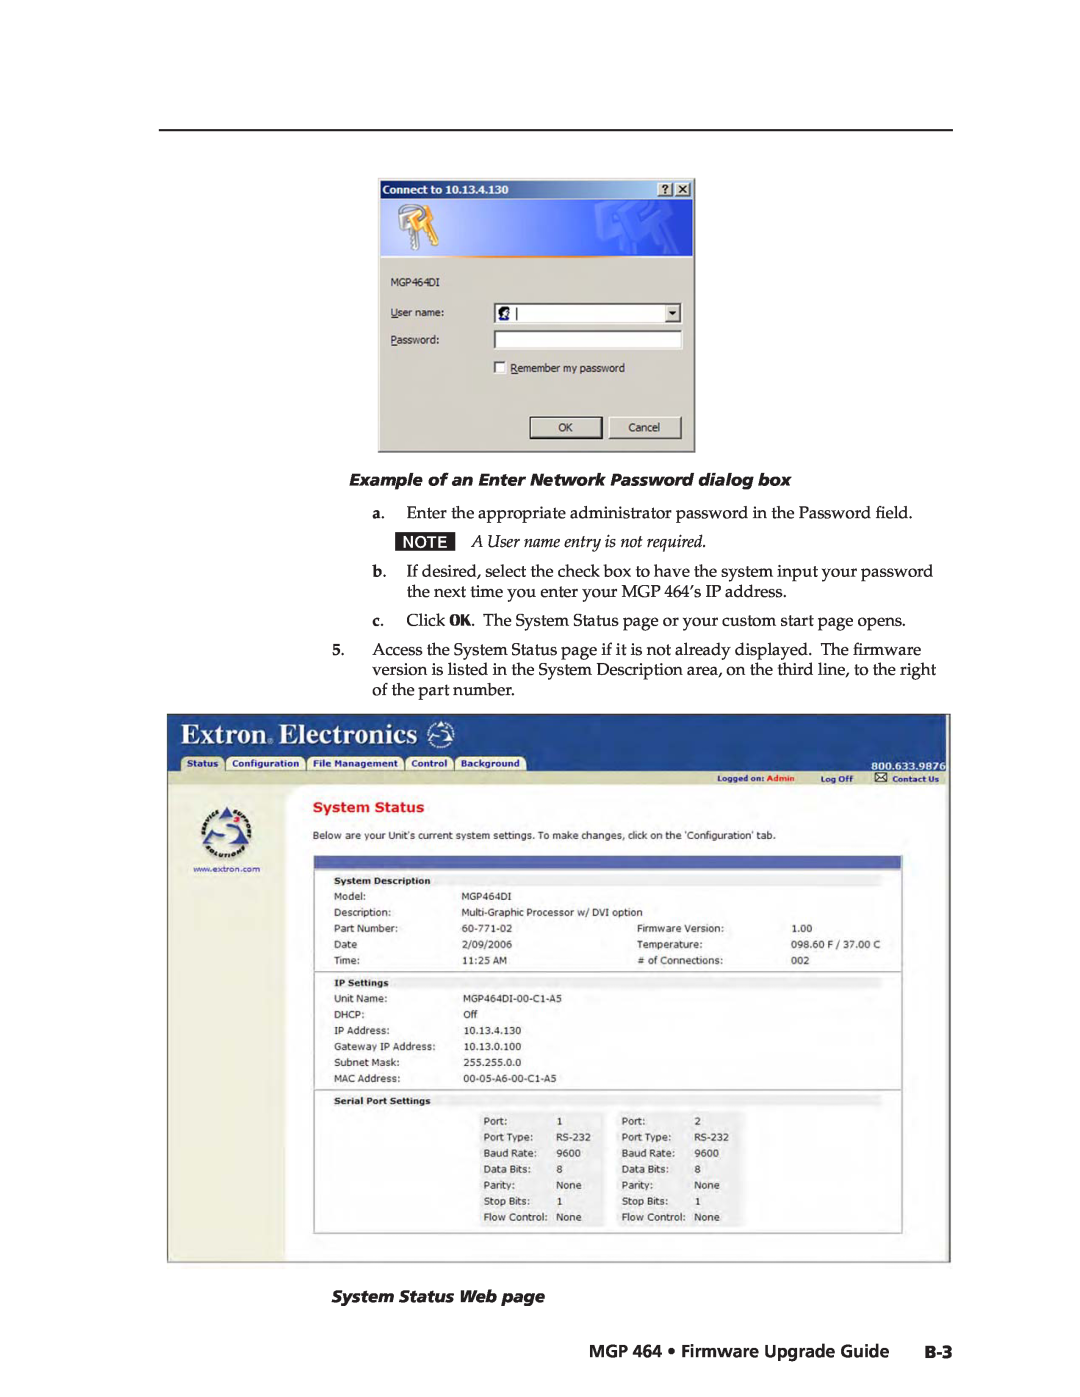 Extron electronic MGP 464 DI manual Preliminary, Example of an Enter Network Password dialog box, System Status Web page 